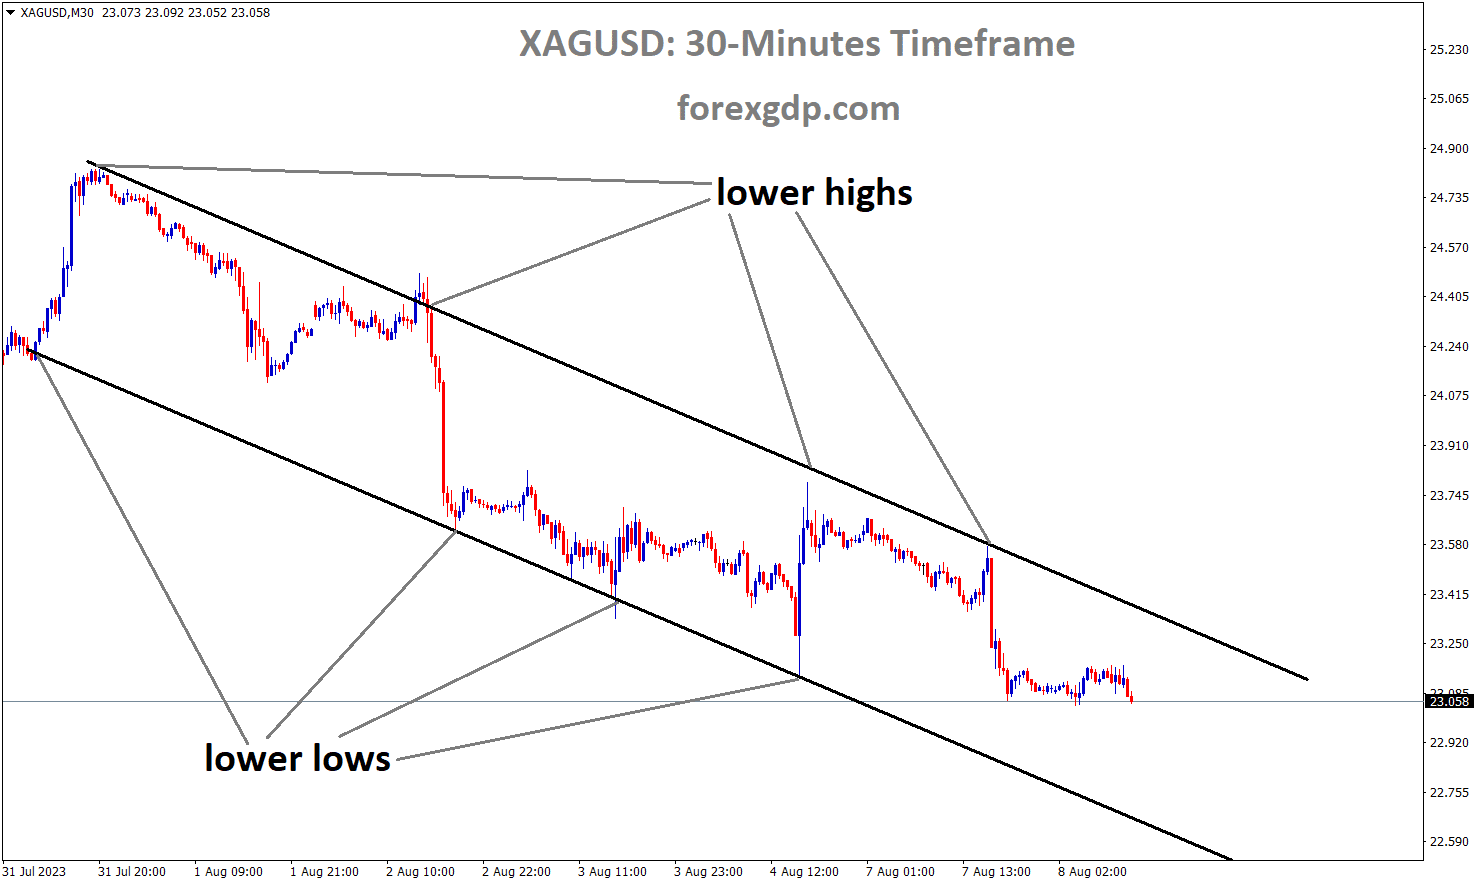 XAGUSD Silver price is moving in the Descending channel and the market has fallen from the lower high area of the channel